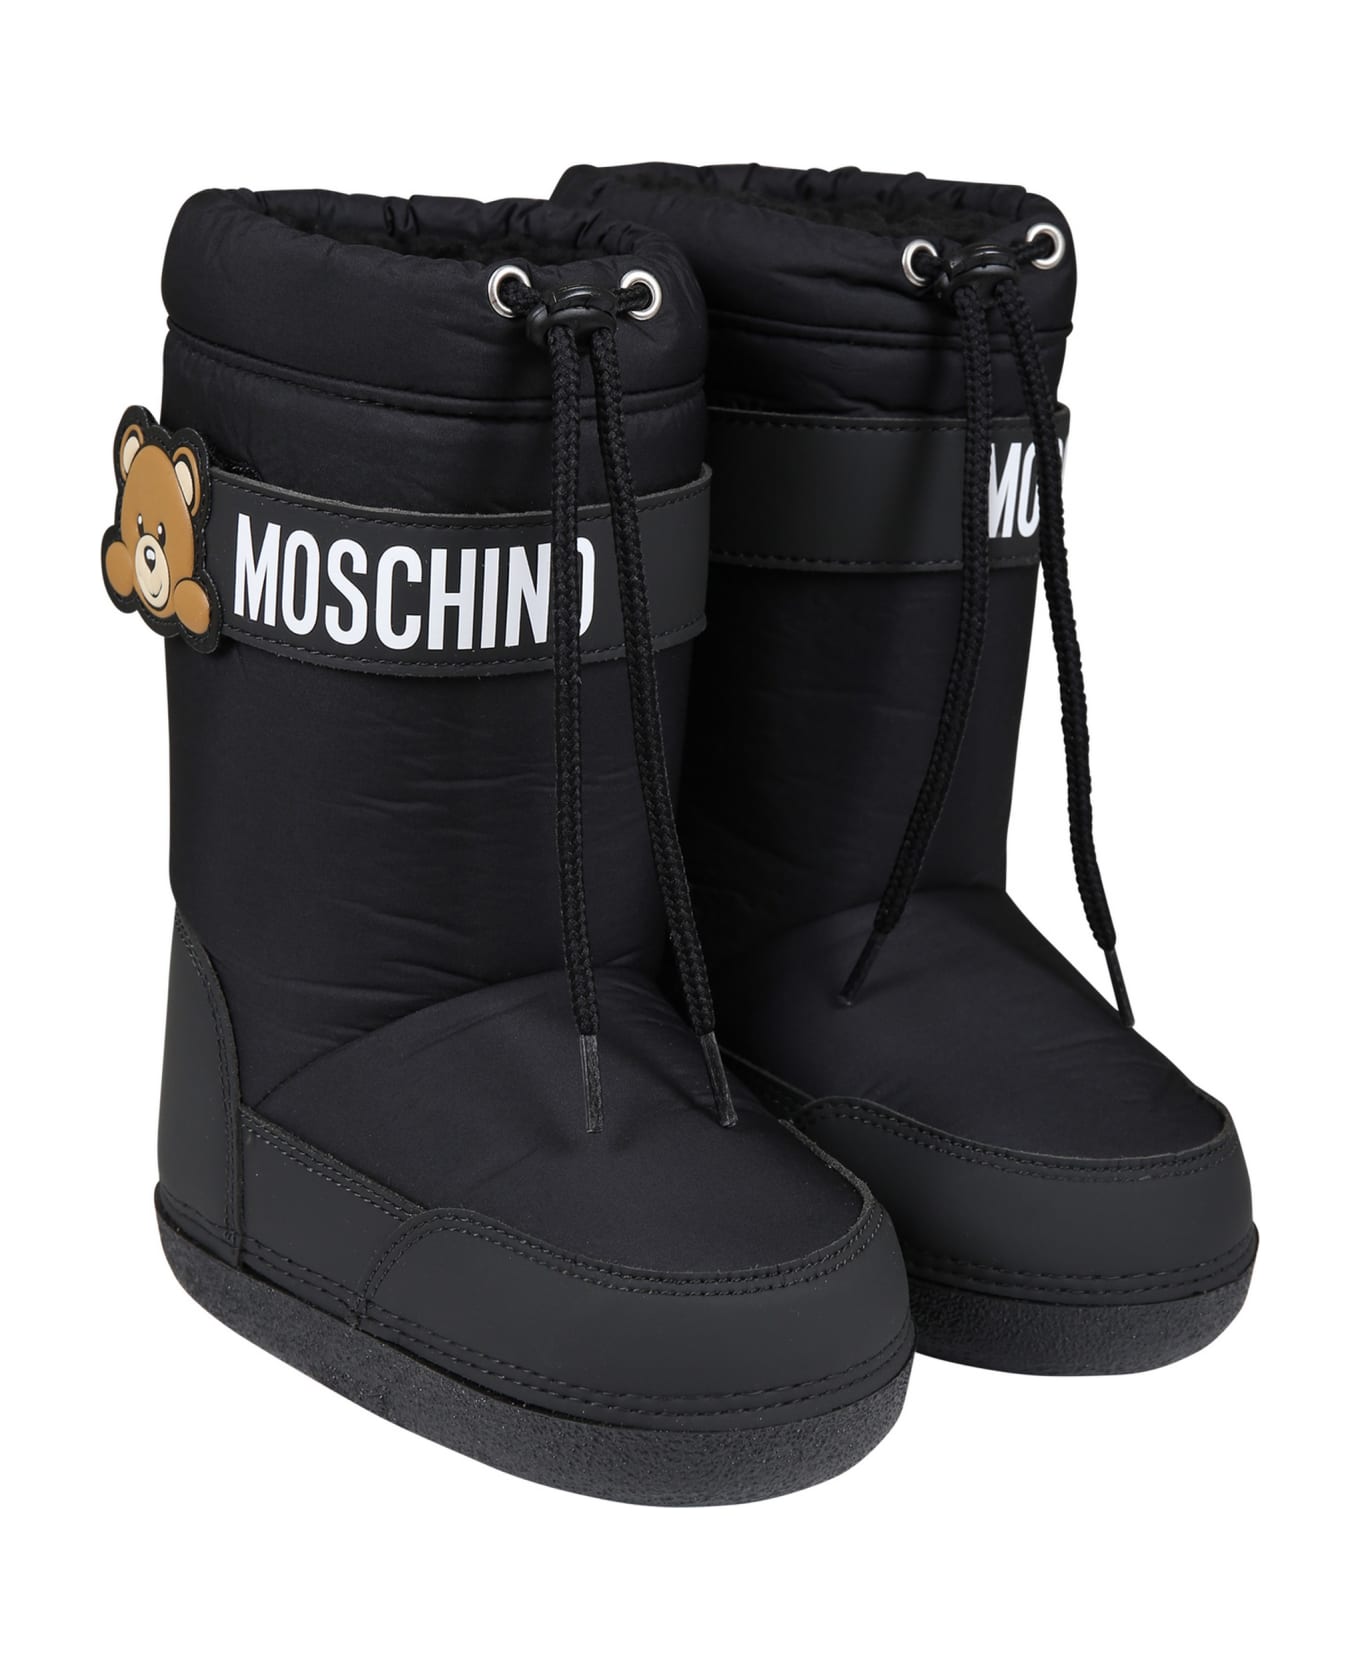 Moschino Balck Boots For Girl With Teddy Bear And Logo - Black